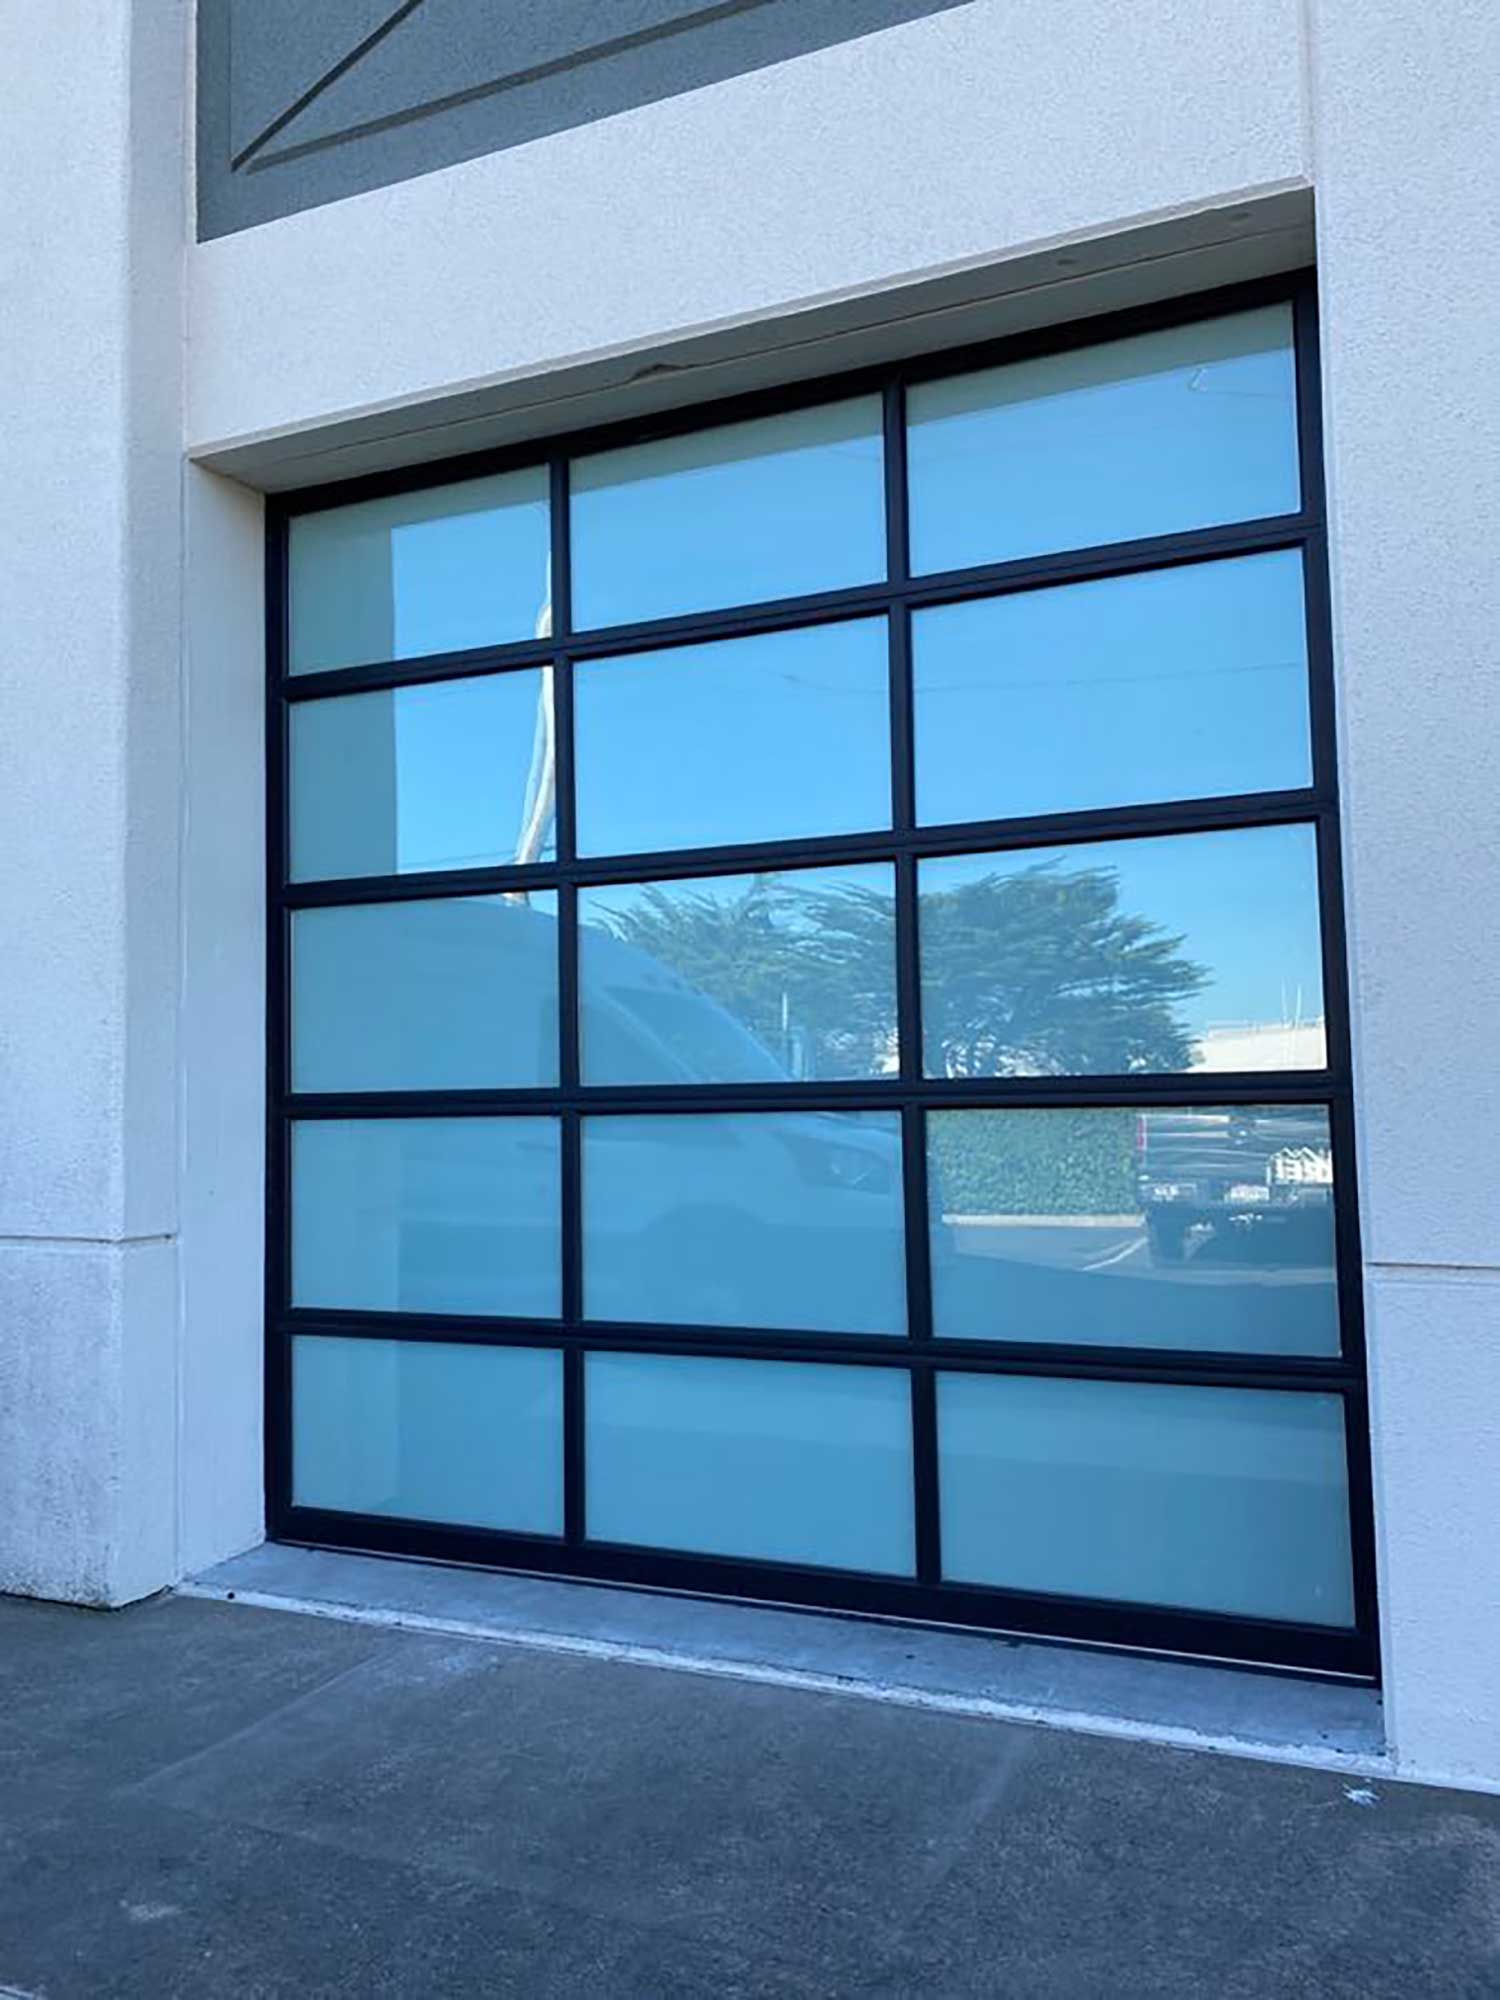 This garage in Richmond, CA was given a privacy upgrade with 3M Fasara Window tint by ClimatePro. Exterior View.